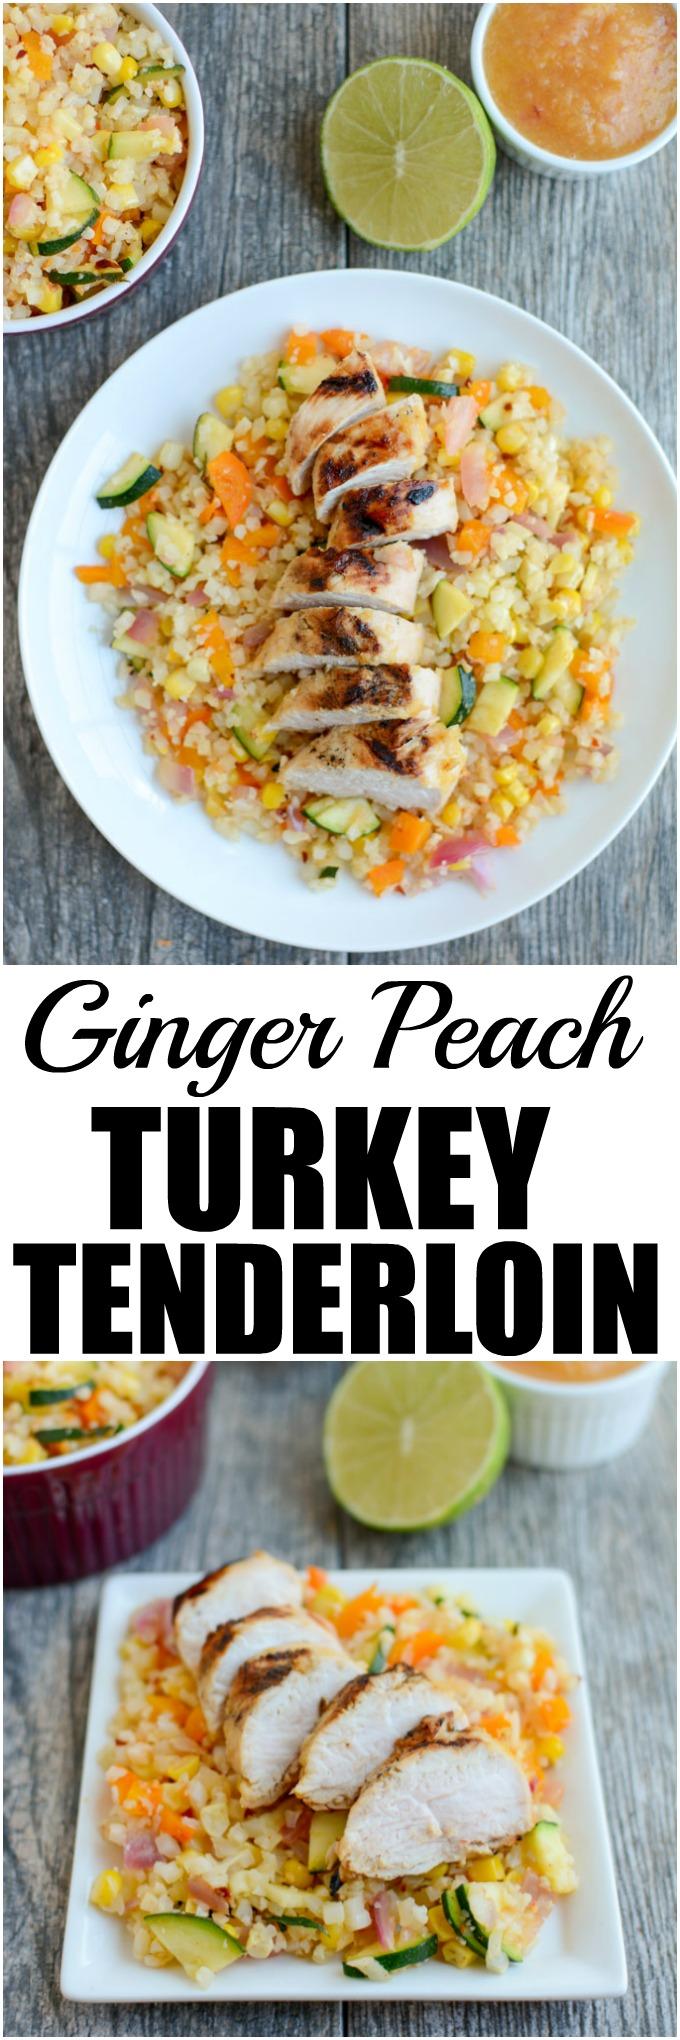 This Grilled Ginger Peach Turkey Tenderloin is perfect for a healthy lunch or dinner. The marinade is made with just five simple ingredients and cooks quickly on the grill!  